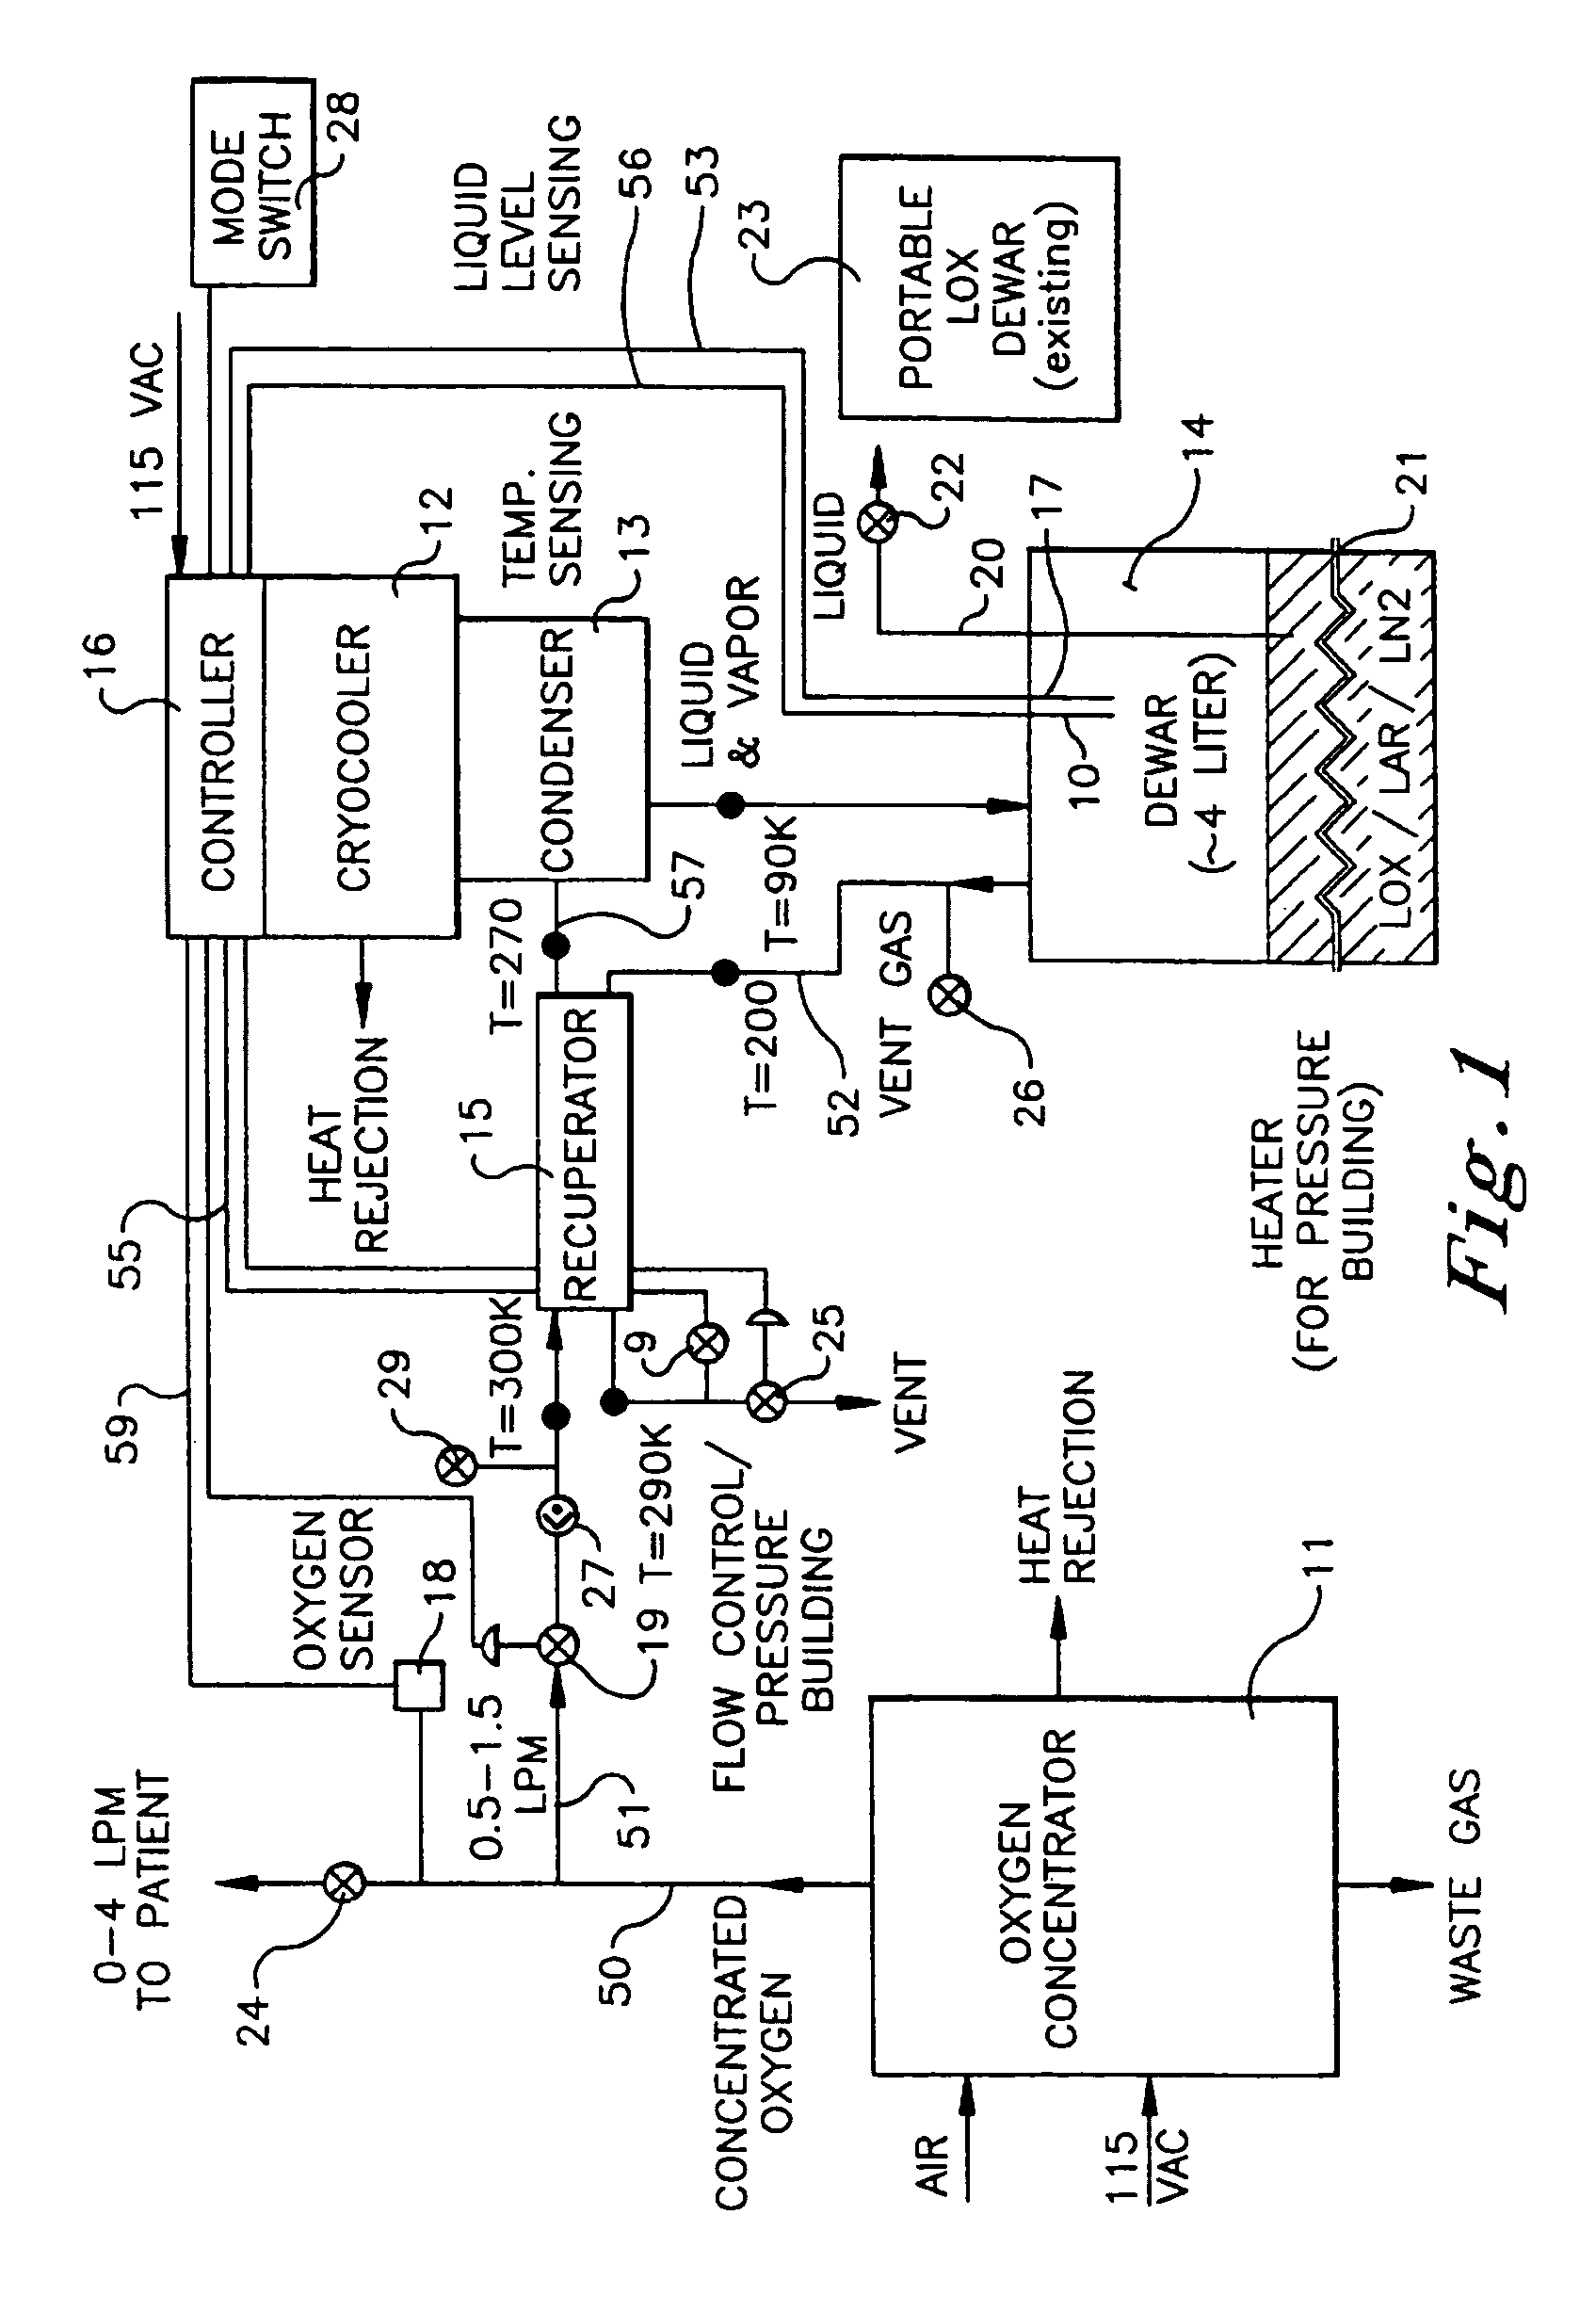 Methods and apparatus to generate liquid ambulatory oxygen from an oxygen concentrator